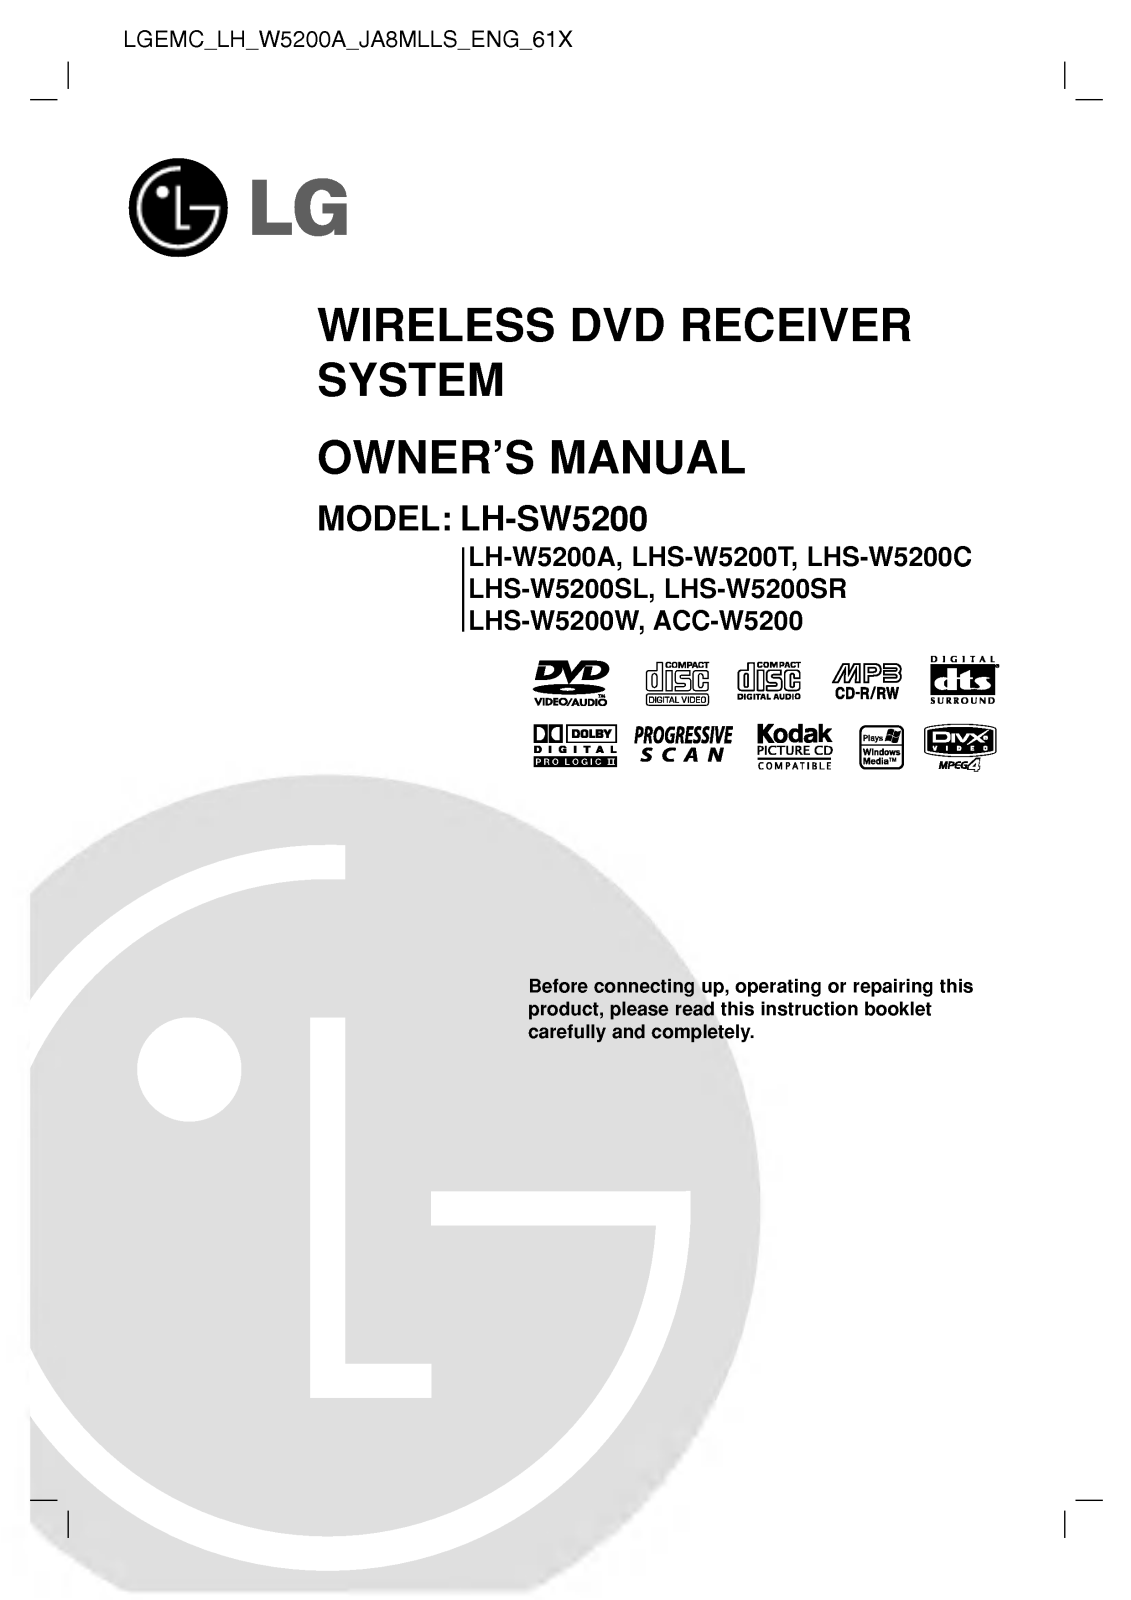 LG LH-W5200A Owner’s Manual